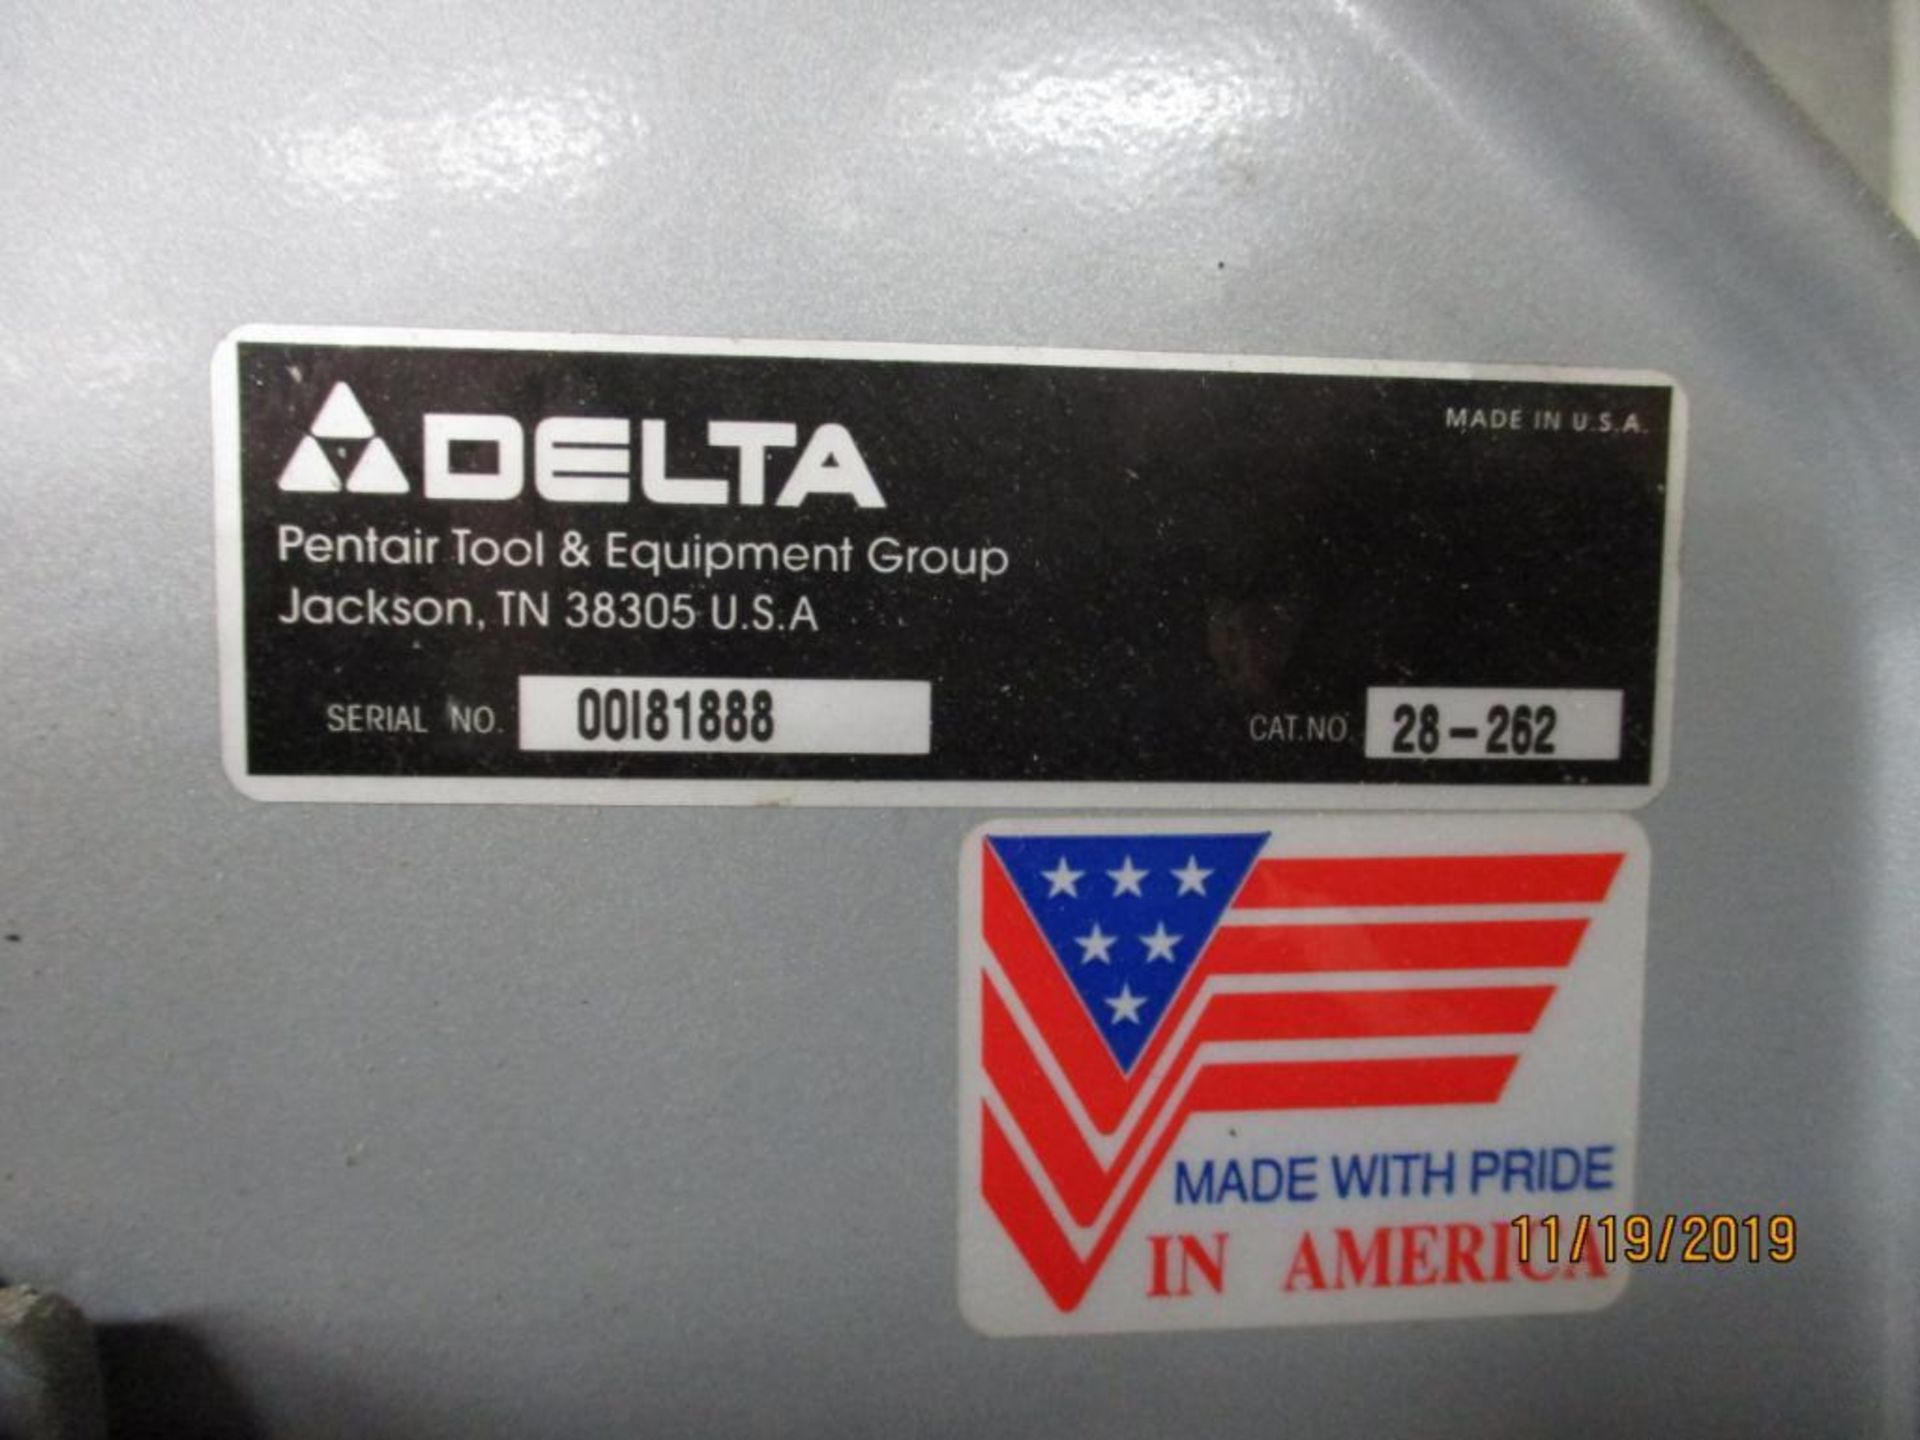 Delta 14" Bandsaw, Blade Length 77" Blade Width 1/8 To 3/4" Cat. No. 28-262 S/N 00181888 - Image 3 of 3